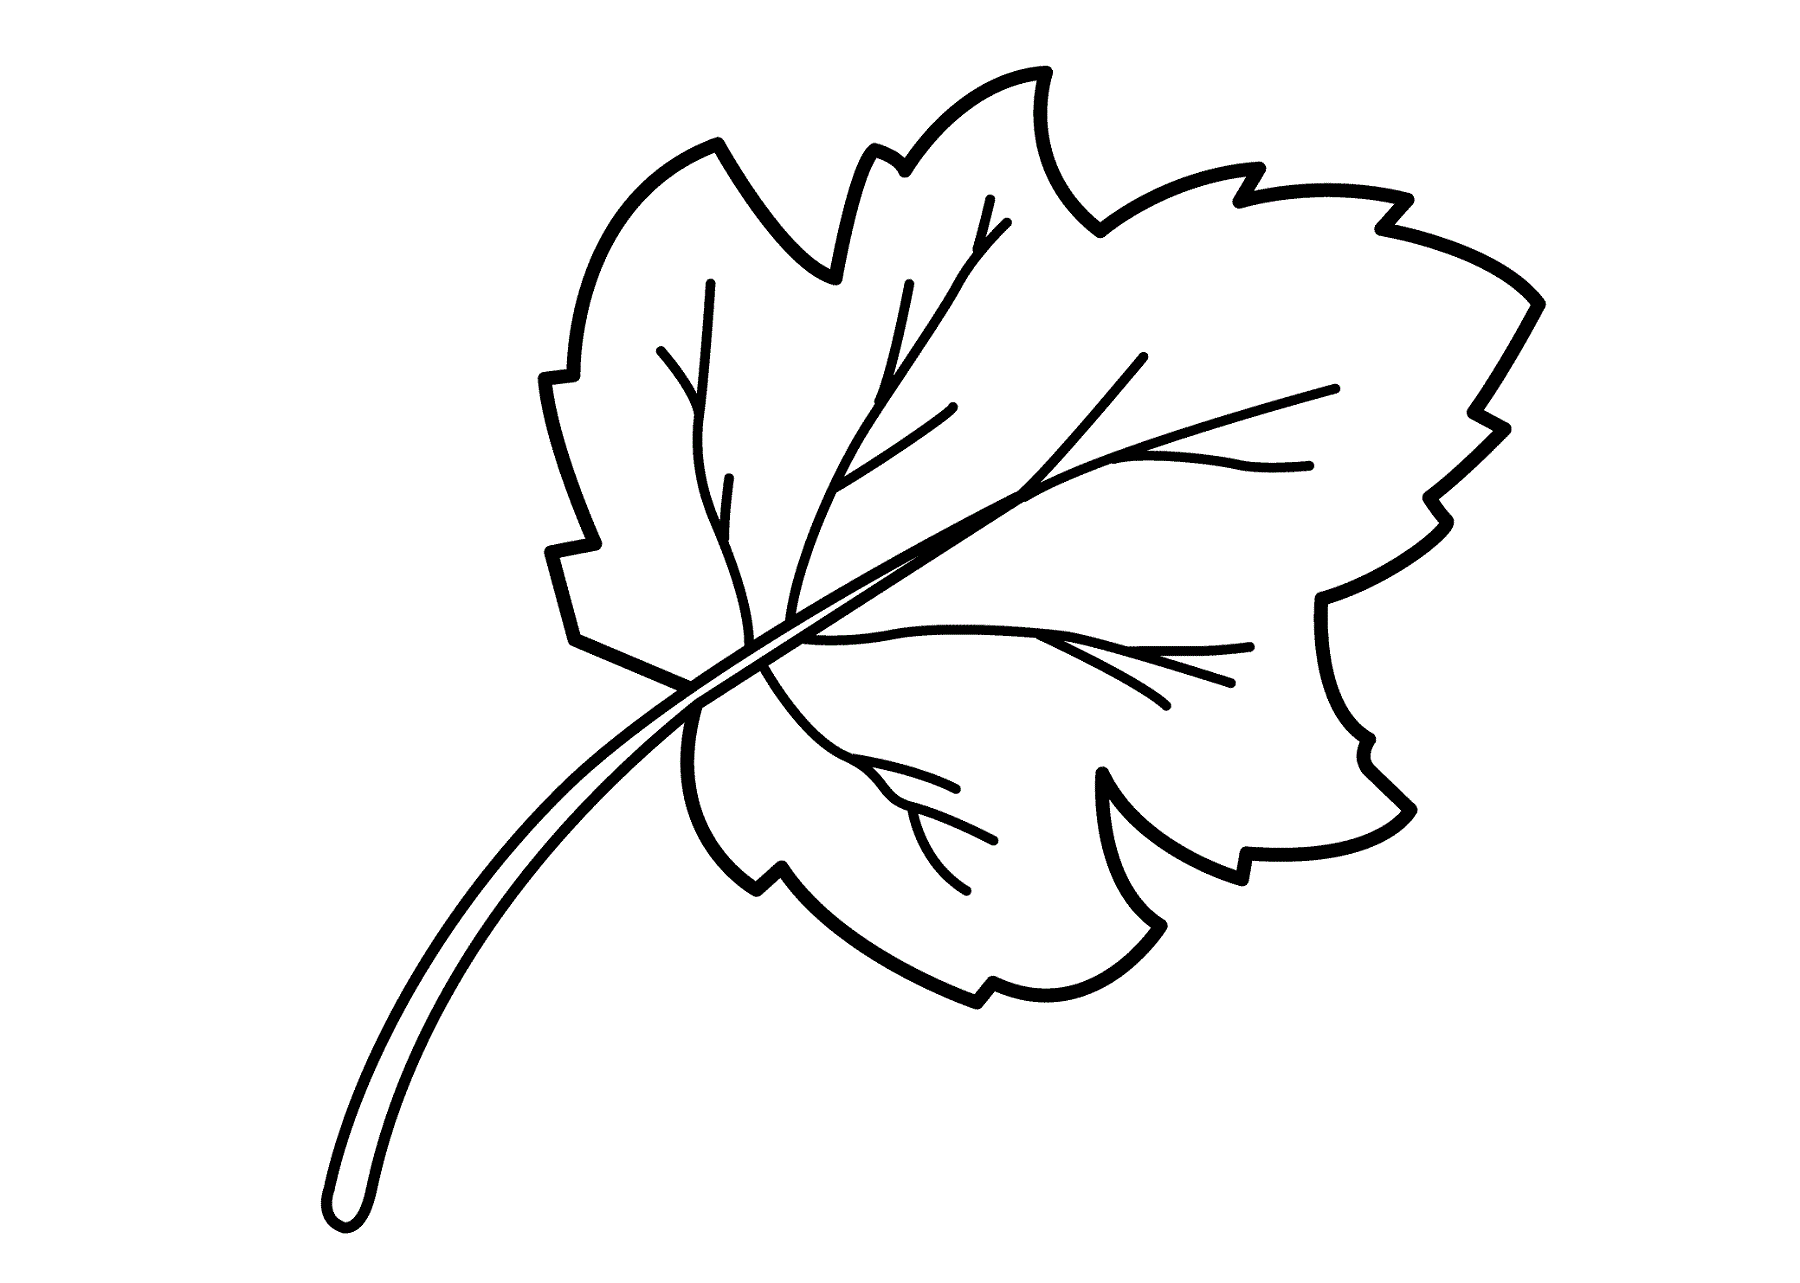 fall-leaves-preschool-coloring-pages-different-designs-really-cute